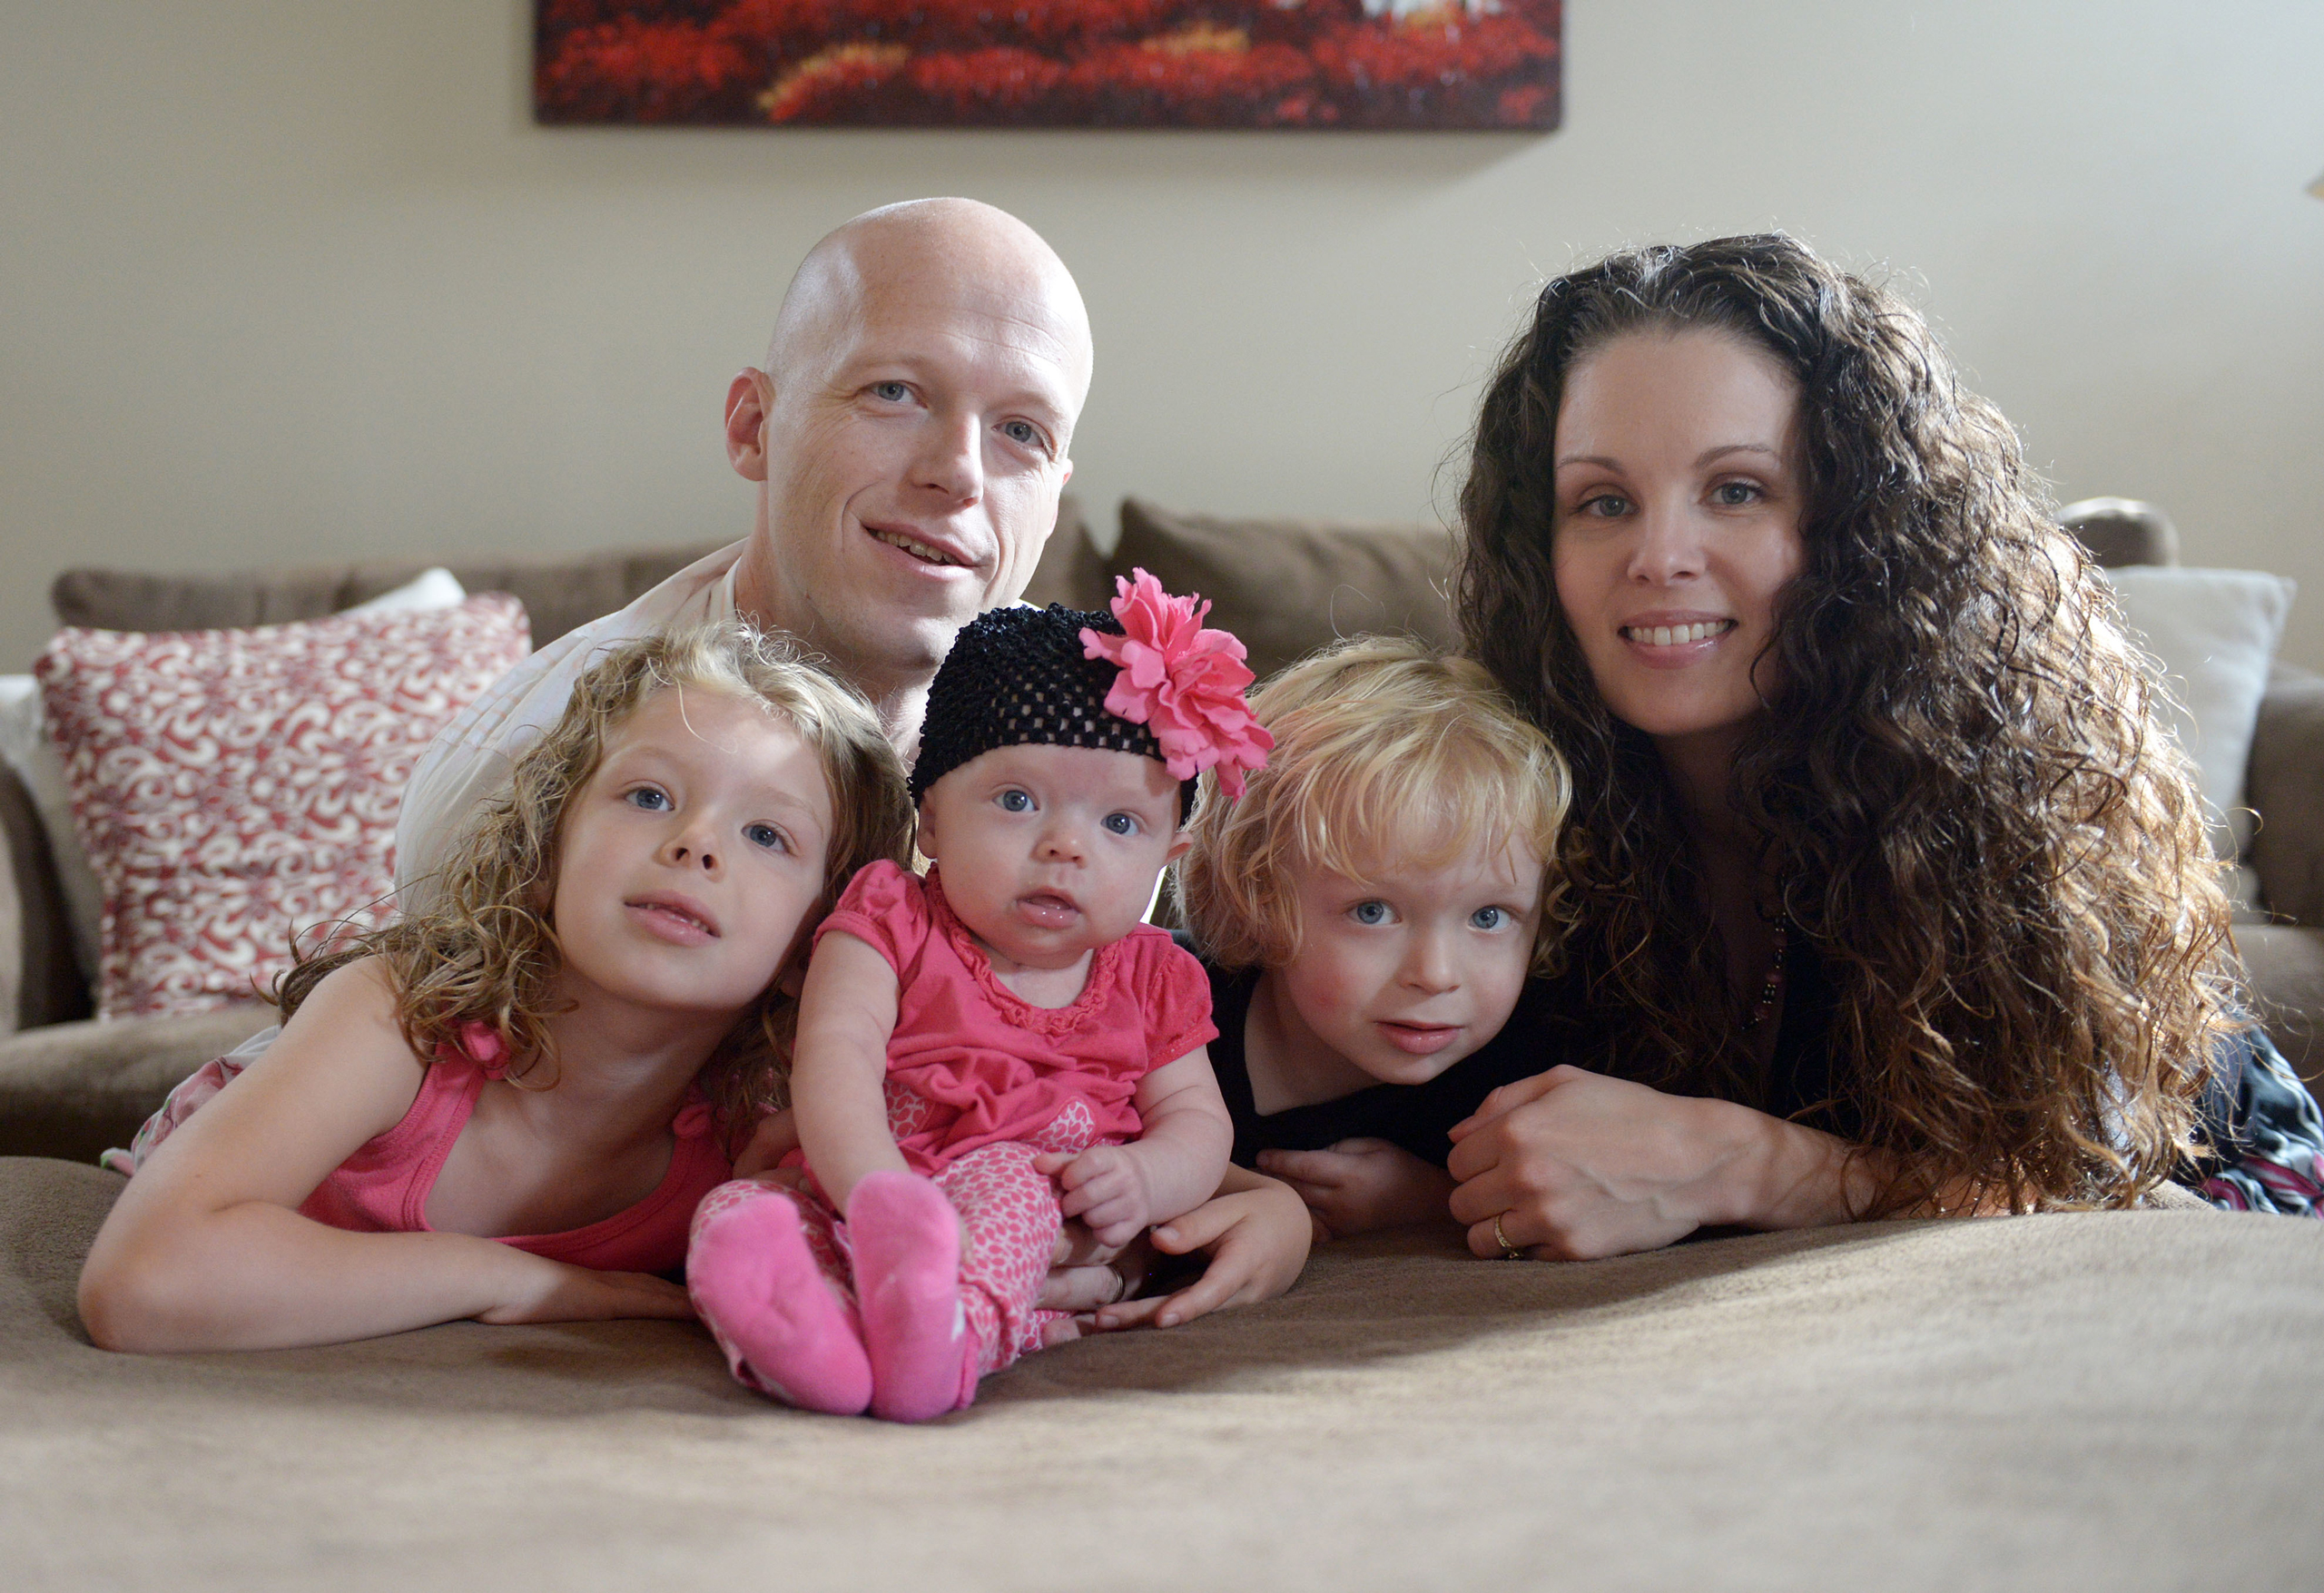 Willow Short, 4-month-old, center, along with her parents Megan and Mark and sister Liana, 6, and brother Mark, 3, poses for a photo in Sinking Spring, Pa. on Sept. 1, 2014. (Susan L. Angstadt—Reading Eagle/AP)